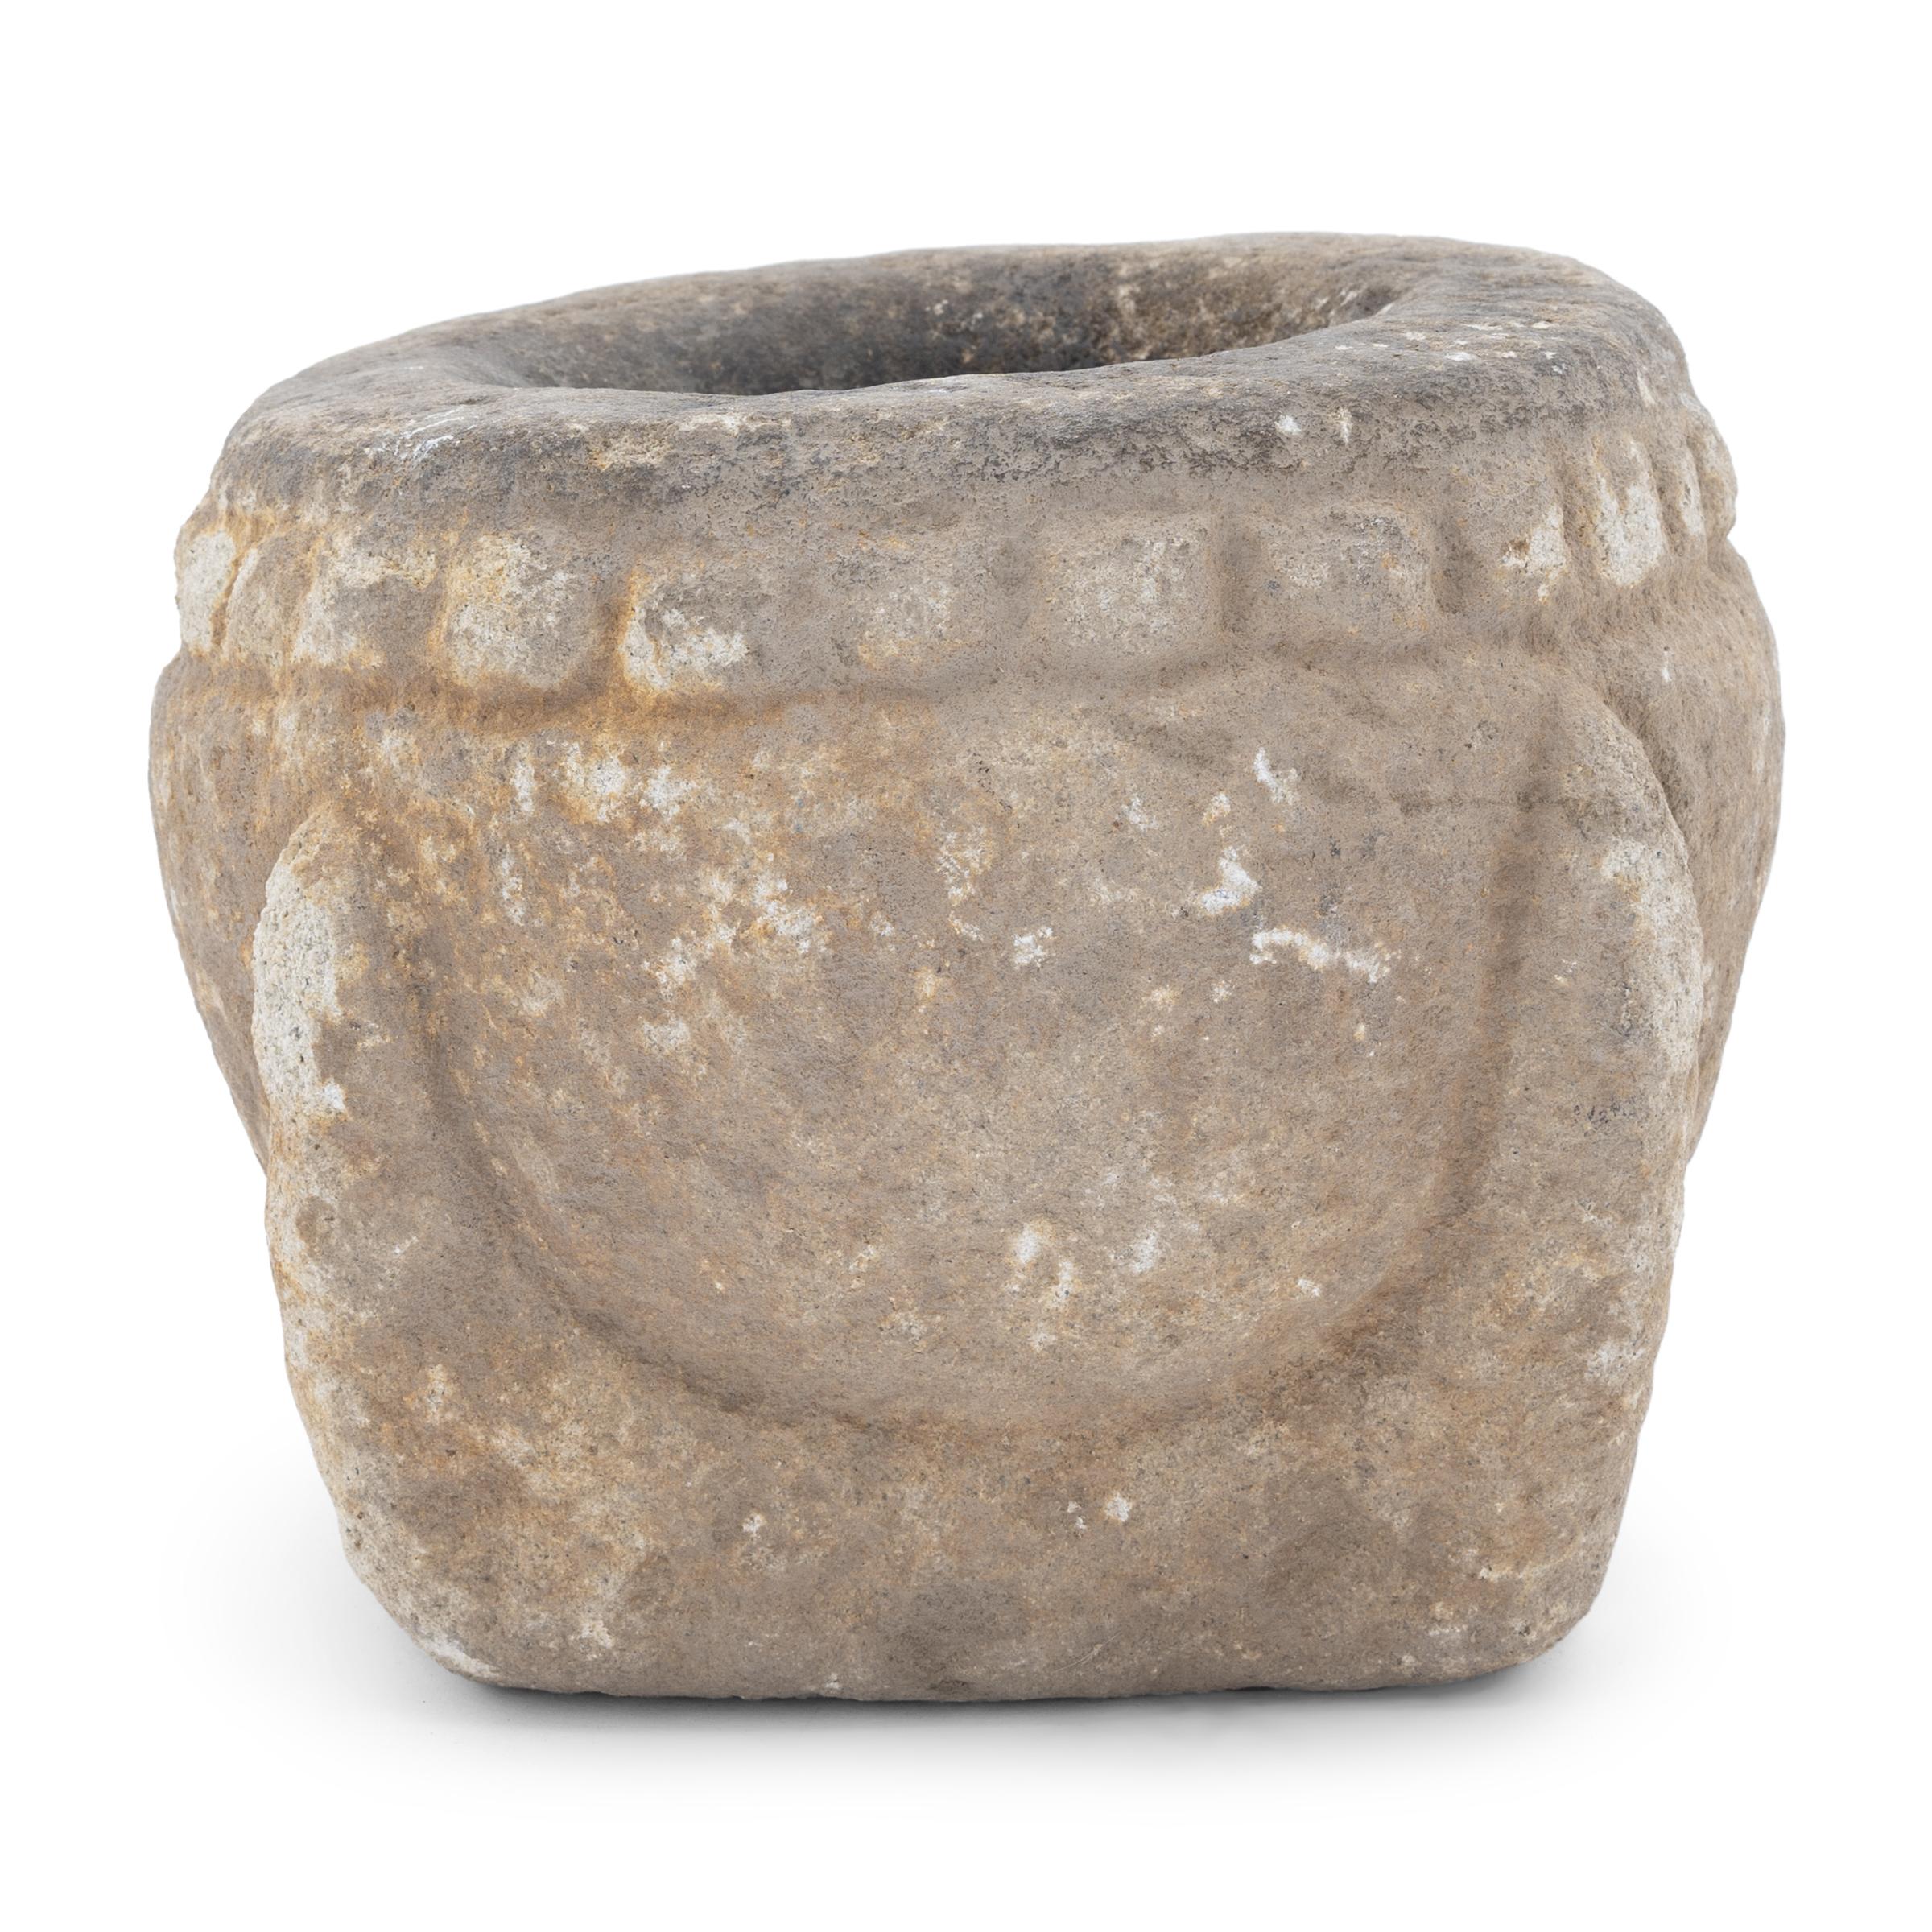 This stone mortar from the early 20th century was once used in a provincial kitchen to grind herbs, spices, rice, and other foods. Hand-carved from a solid block of limestone, the mortar has a rounded body with a square base and a flattened rim. A